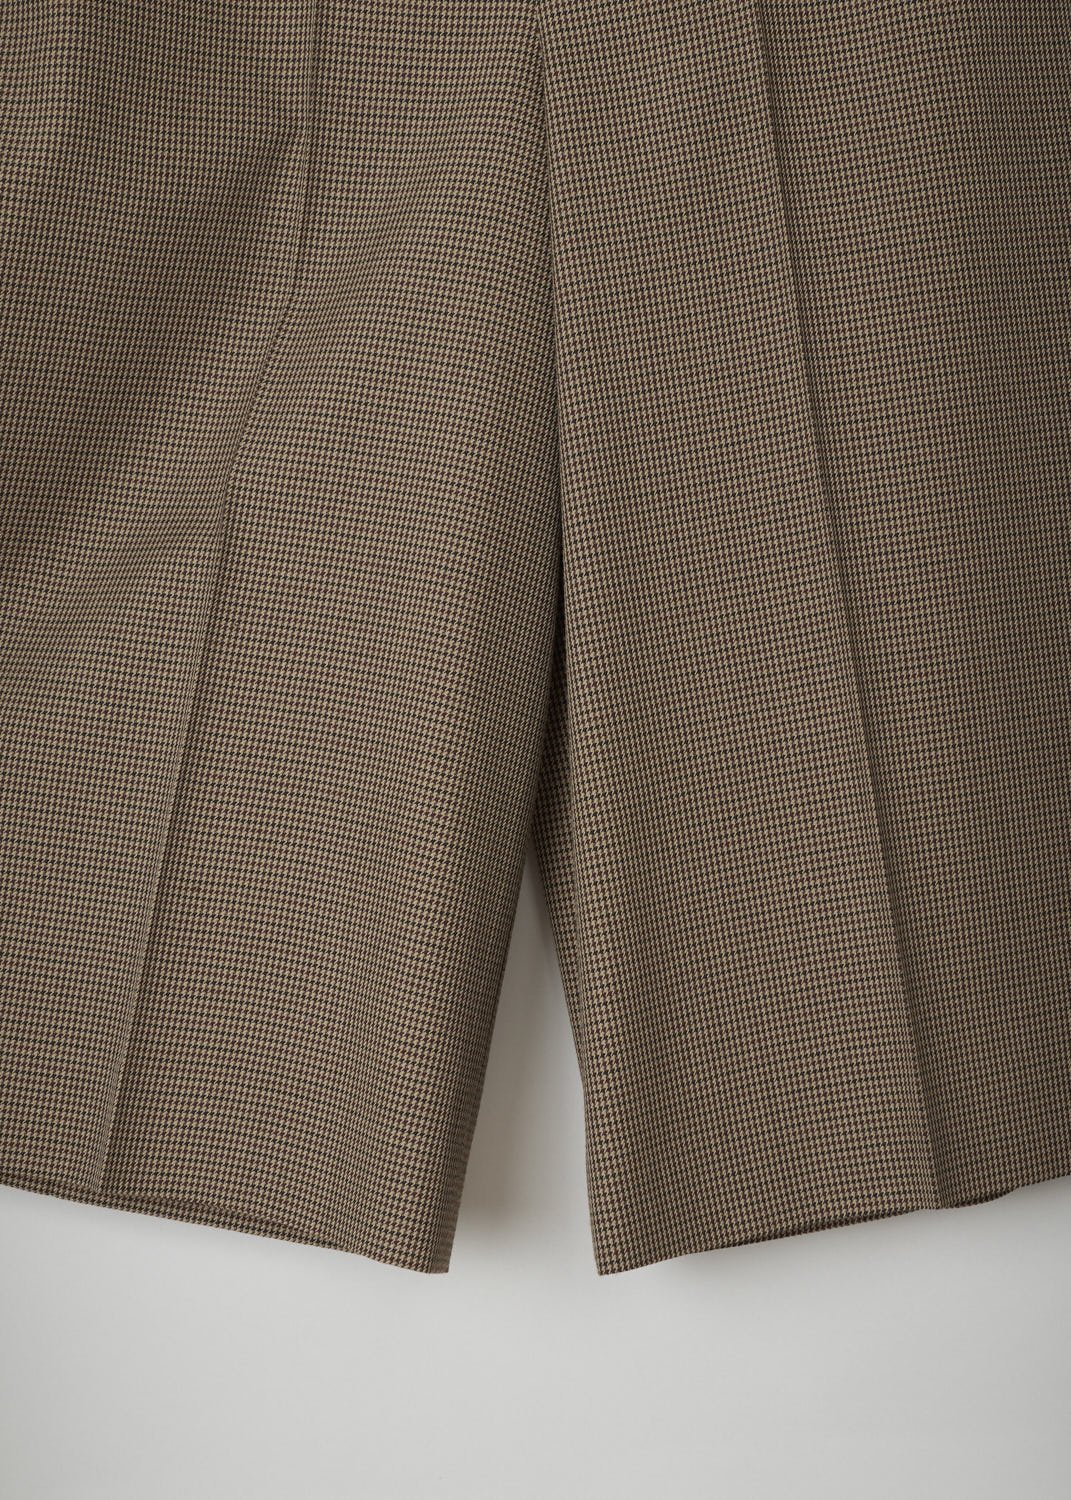 CELINE, BROWN HOUNDSTOOTH CULOTTES, 868H_2P233_28BZ, Brown, Print, Detail, Brown Houndstooth culottes made from wool. These pants have belt loops and the closing option on this model is a concealed hook, button and zipper option. In the front, along the length of the pants, a front pleat can be found. These pants have slanted pockets in the front and two welt pockets in the back.
